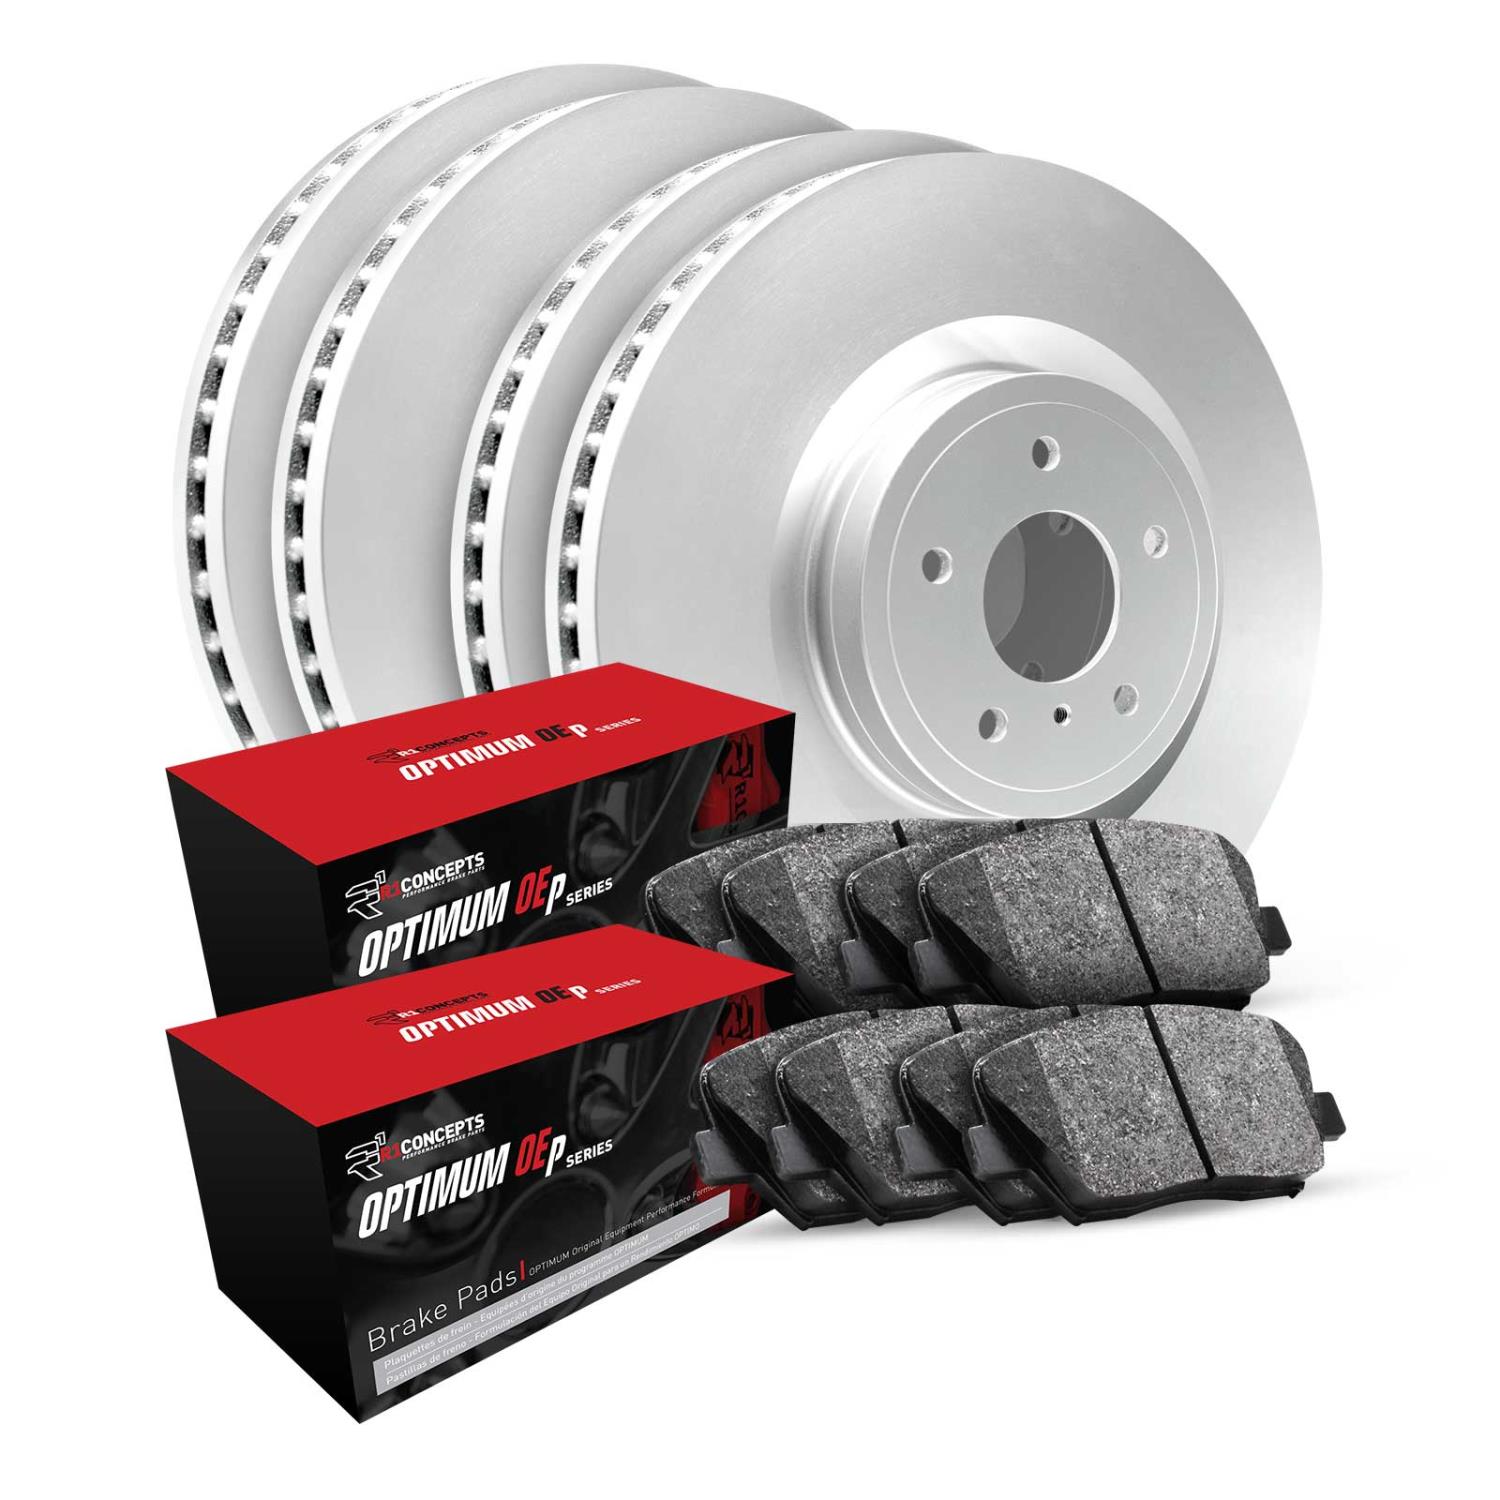 GEO-Carbon Brake Rotor Set w/Optimum OE Pads, 1991-1999 Fits Multiple Makes/Models, Position: Front & Rear